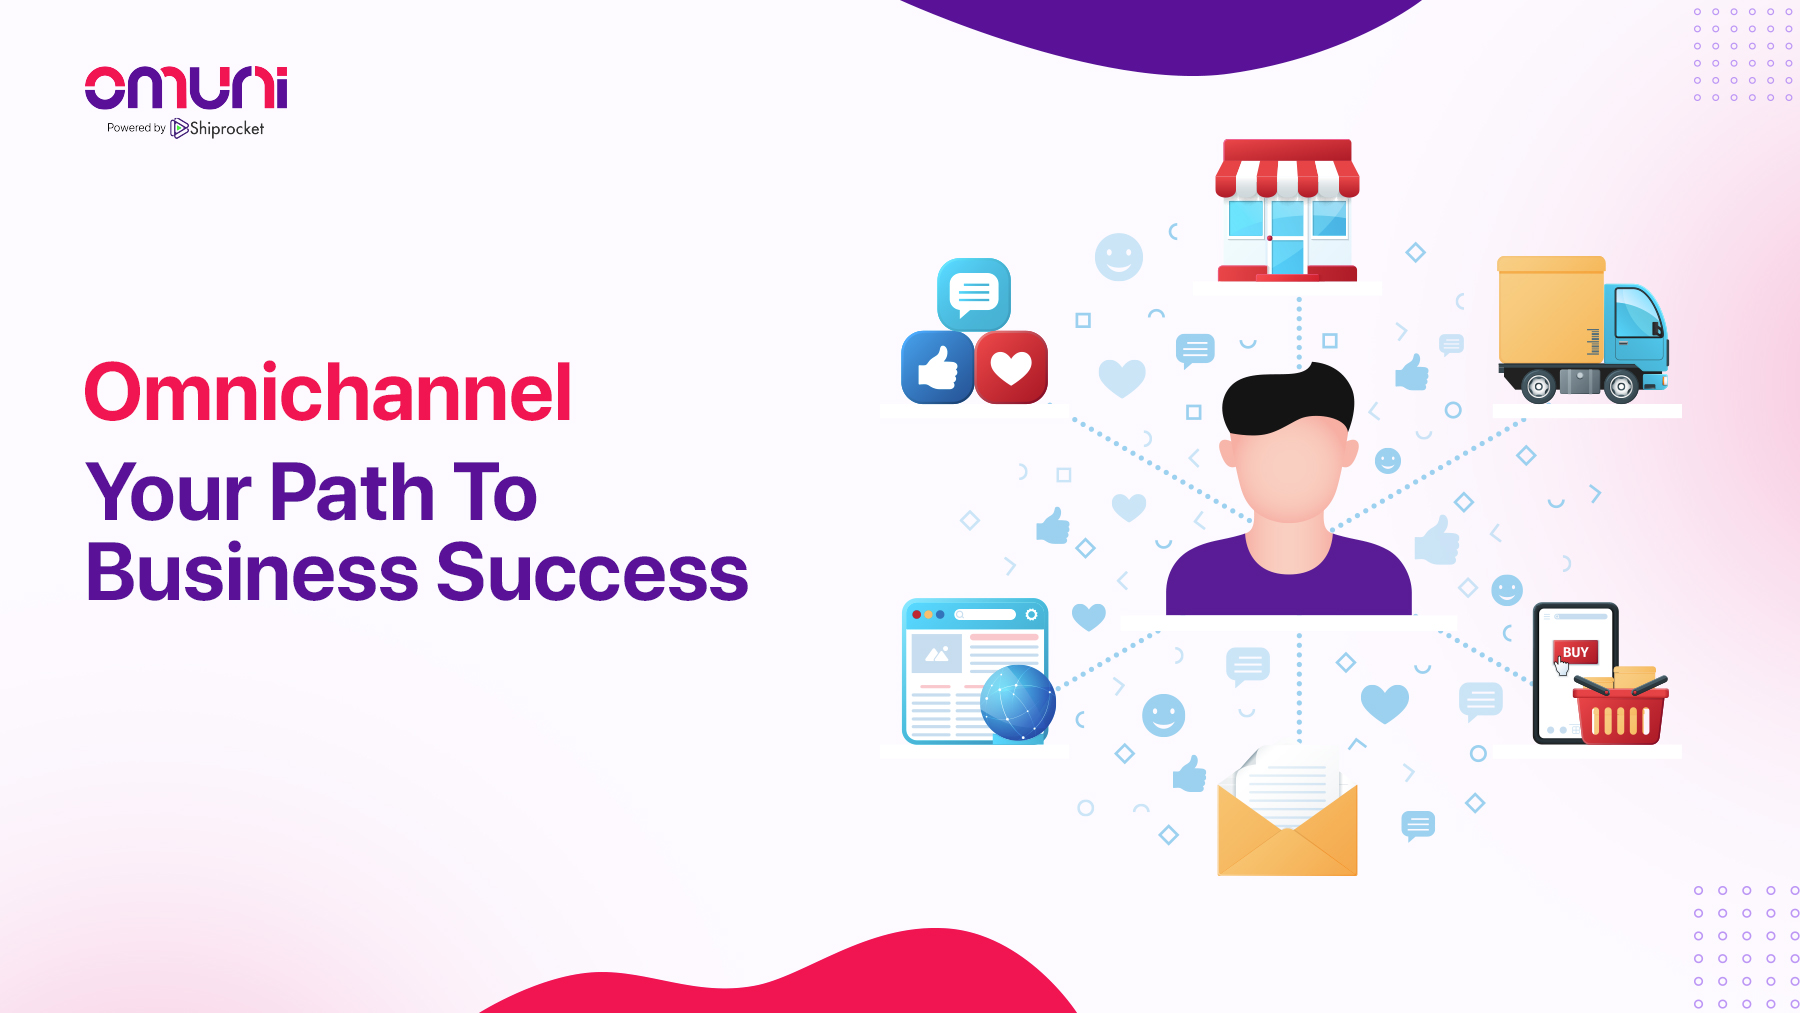 Omnichannel: Your Path to Business Success